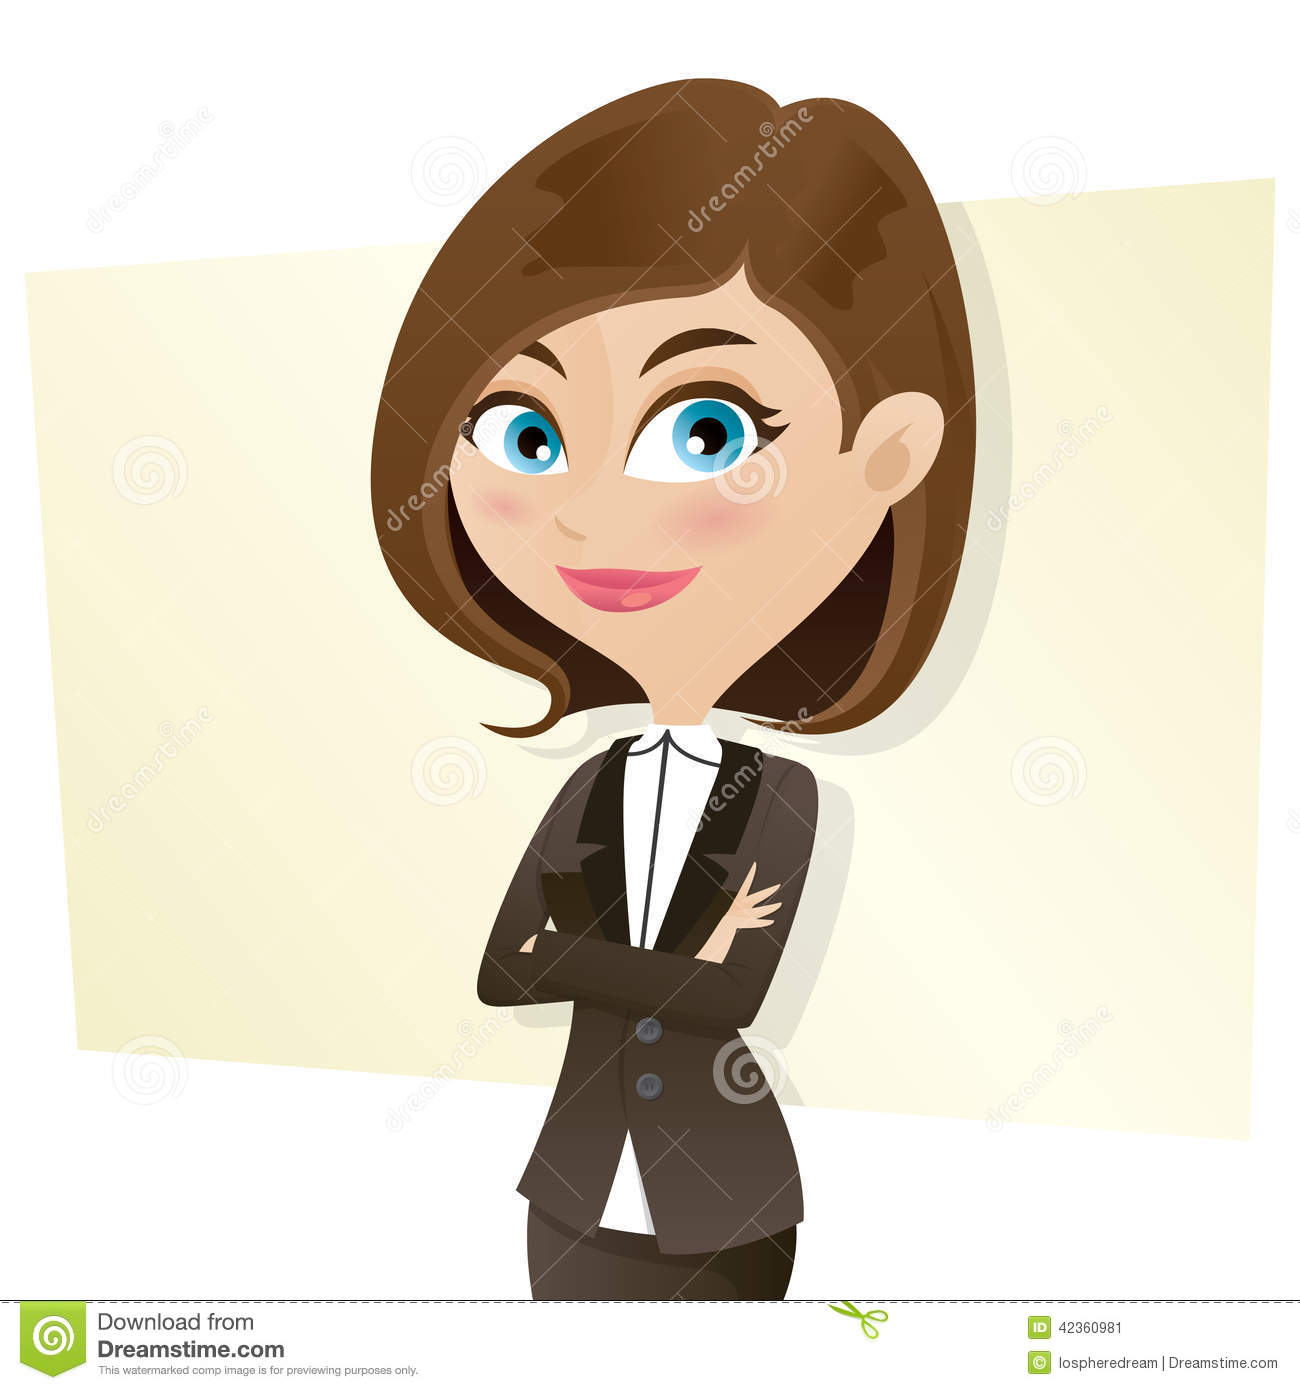 Cartoon Smart Girl In Business Uniform With Folded Arms Stock Vector